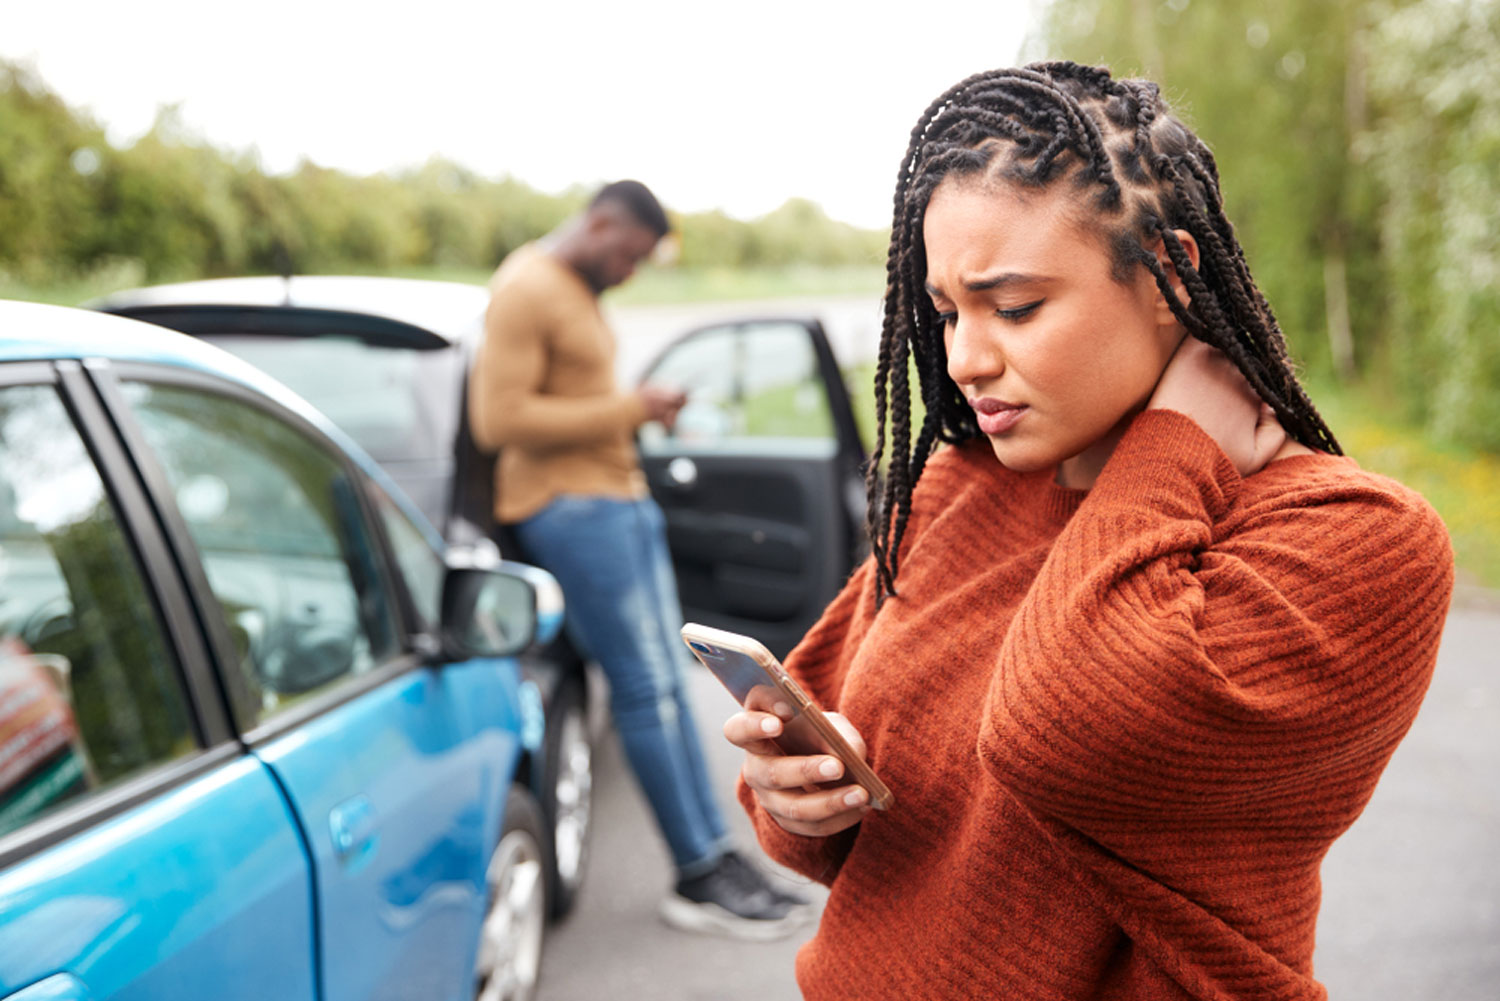 Woman concerned about car checking phone